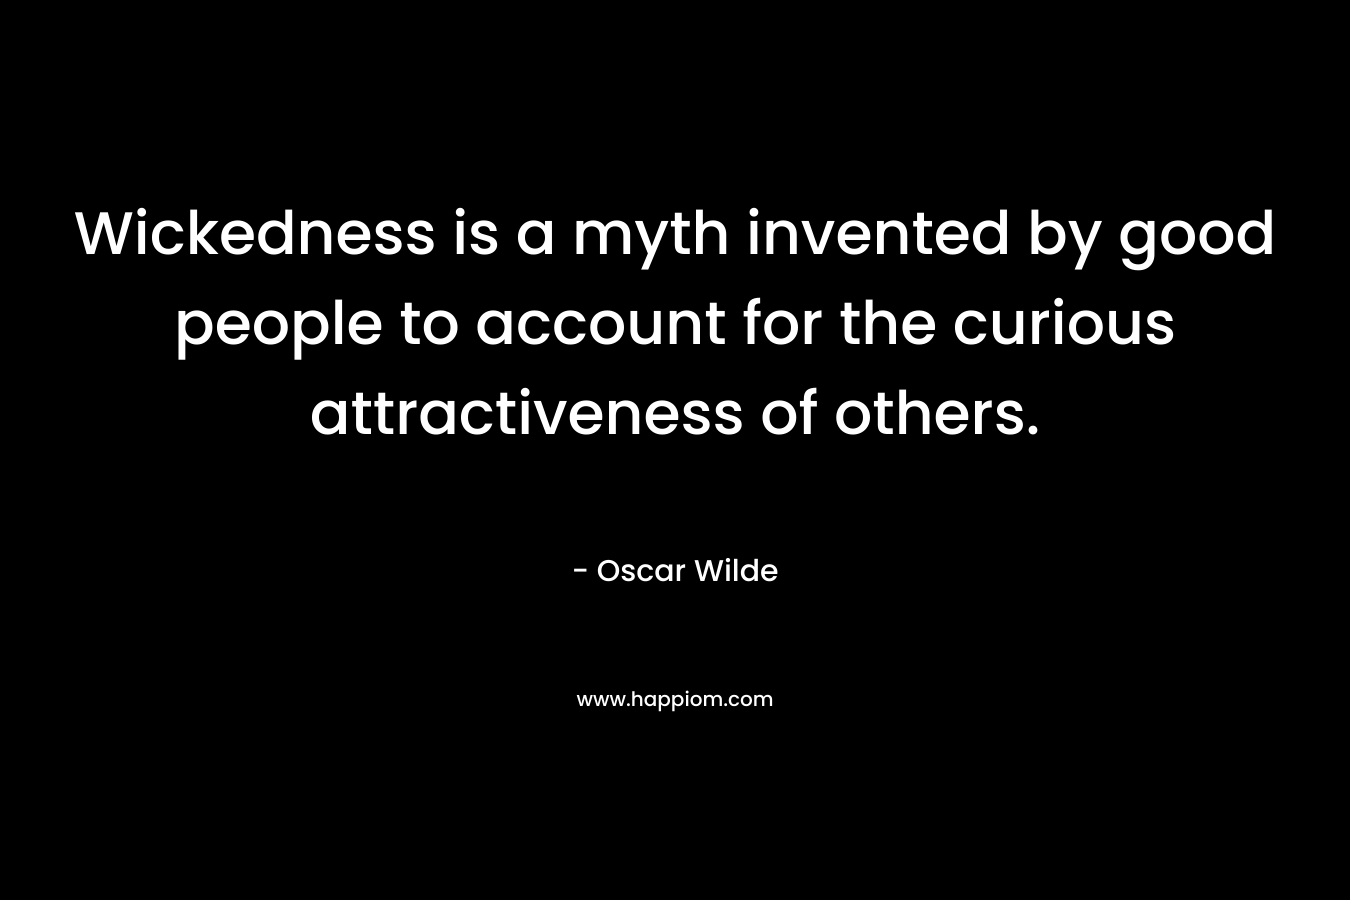 Wickedness is a myth invented by good people to account for the curious attractiveness of others.